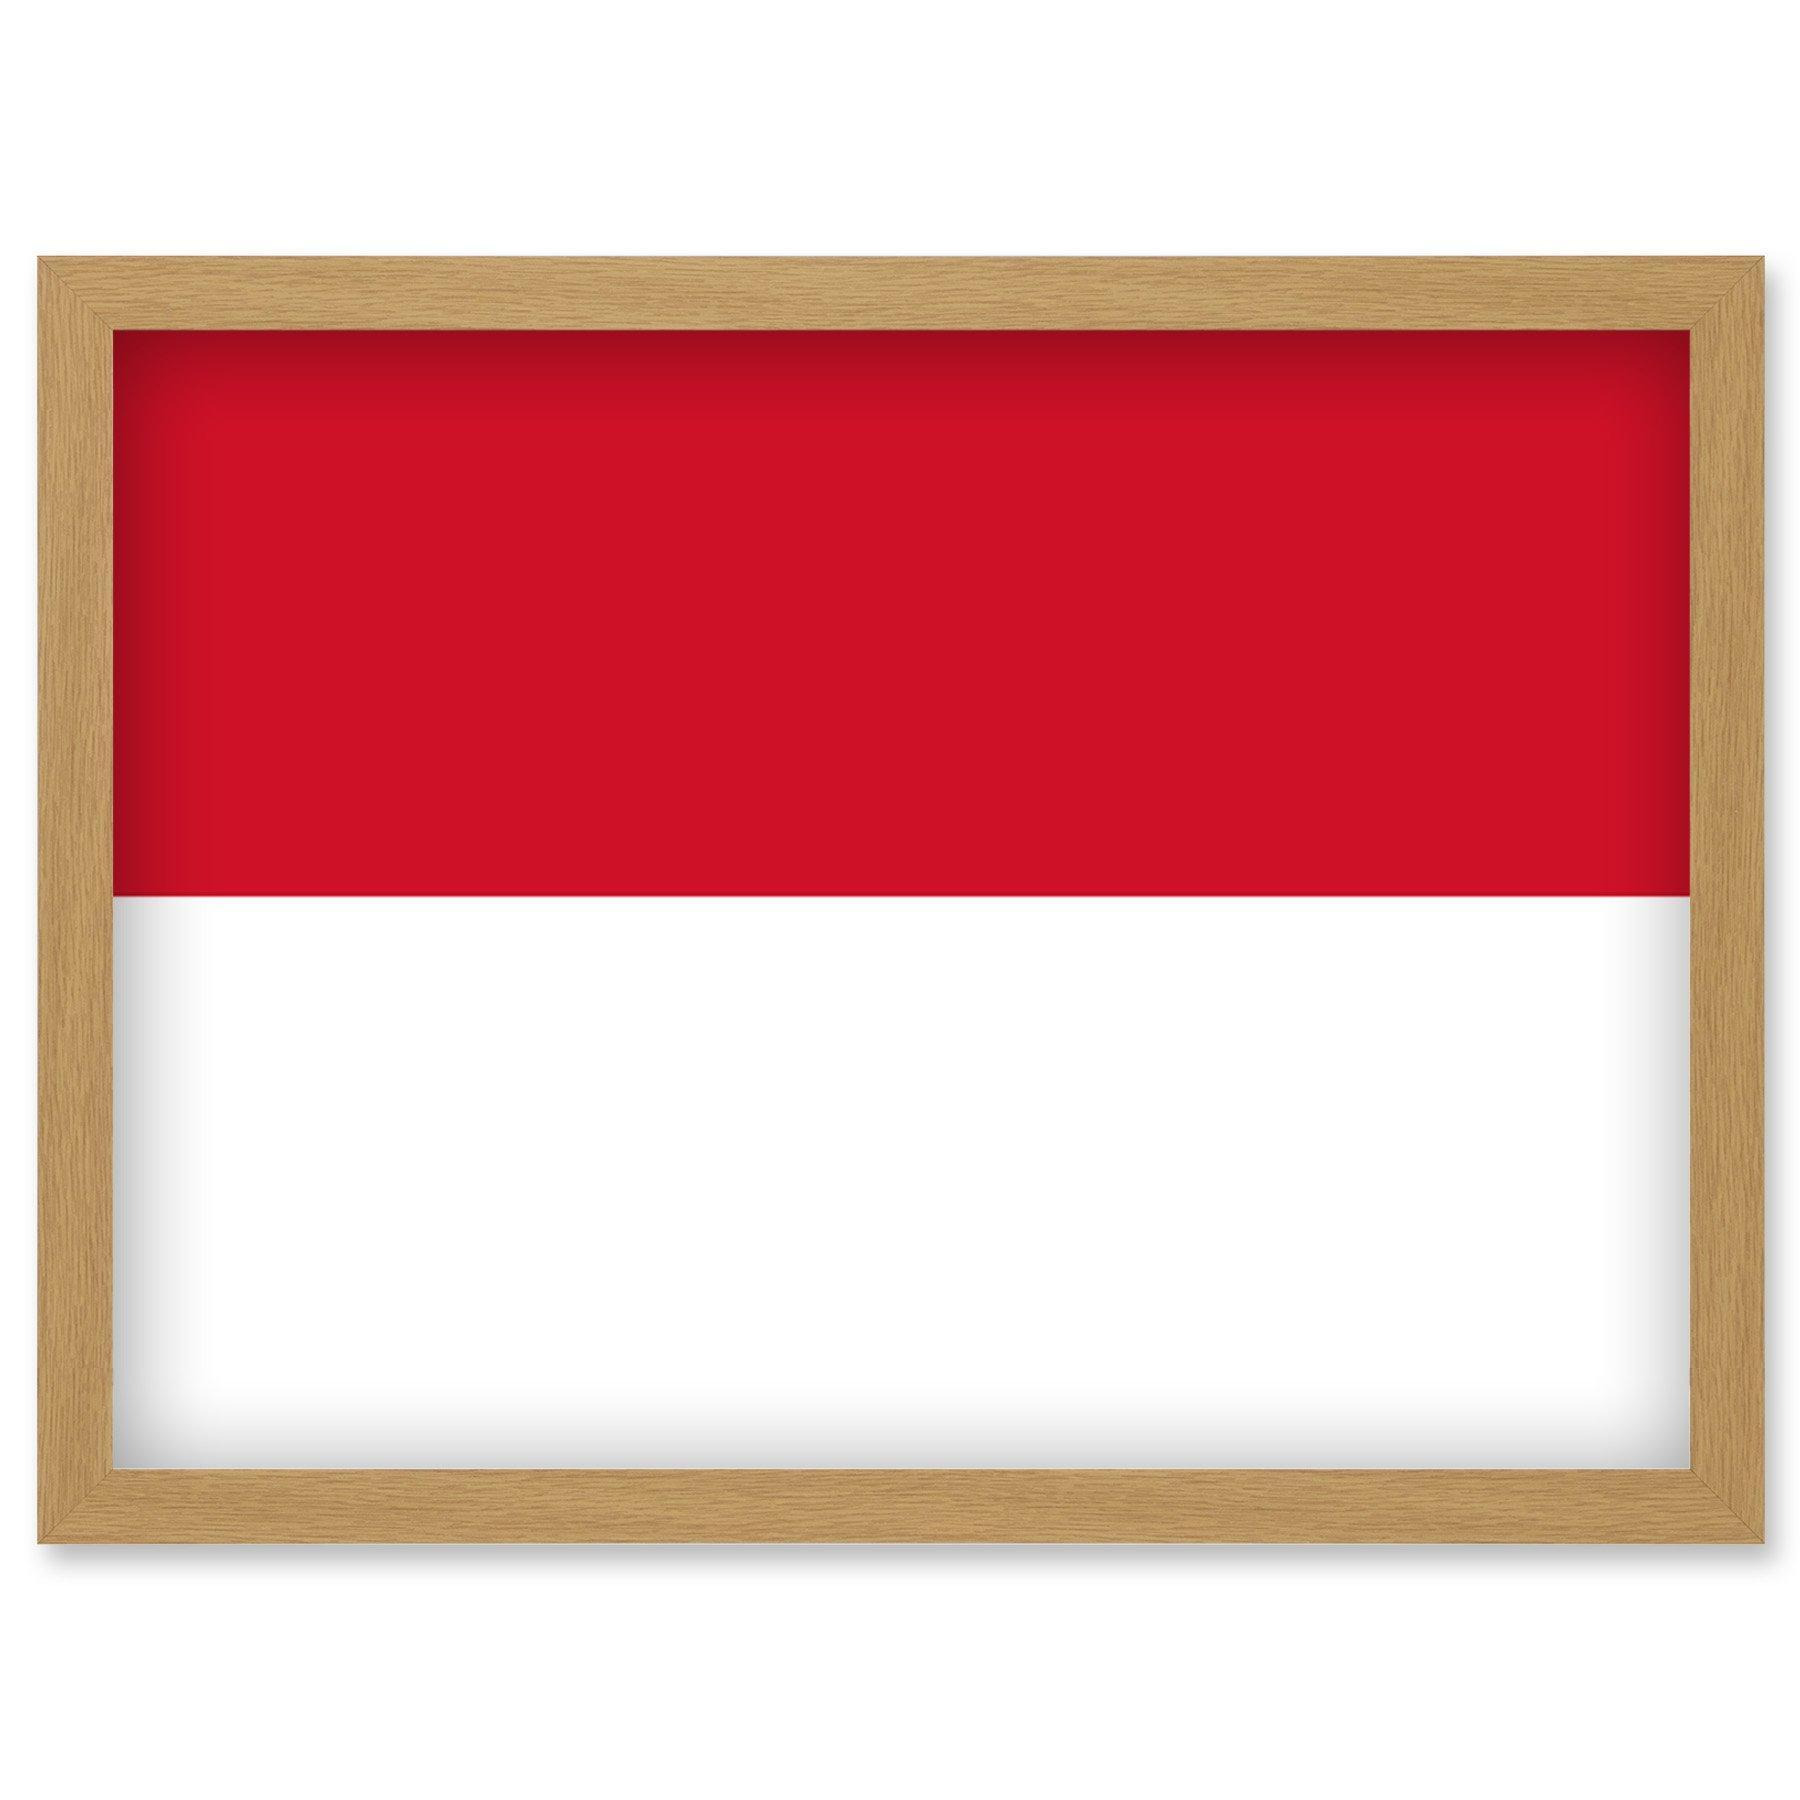 Monaco National Flag Vexillology World Flags Country Region Poster Artwork Framed Wall Art Print A4 - image 1